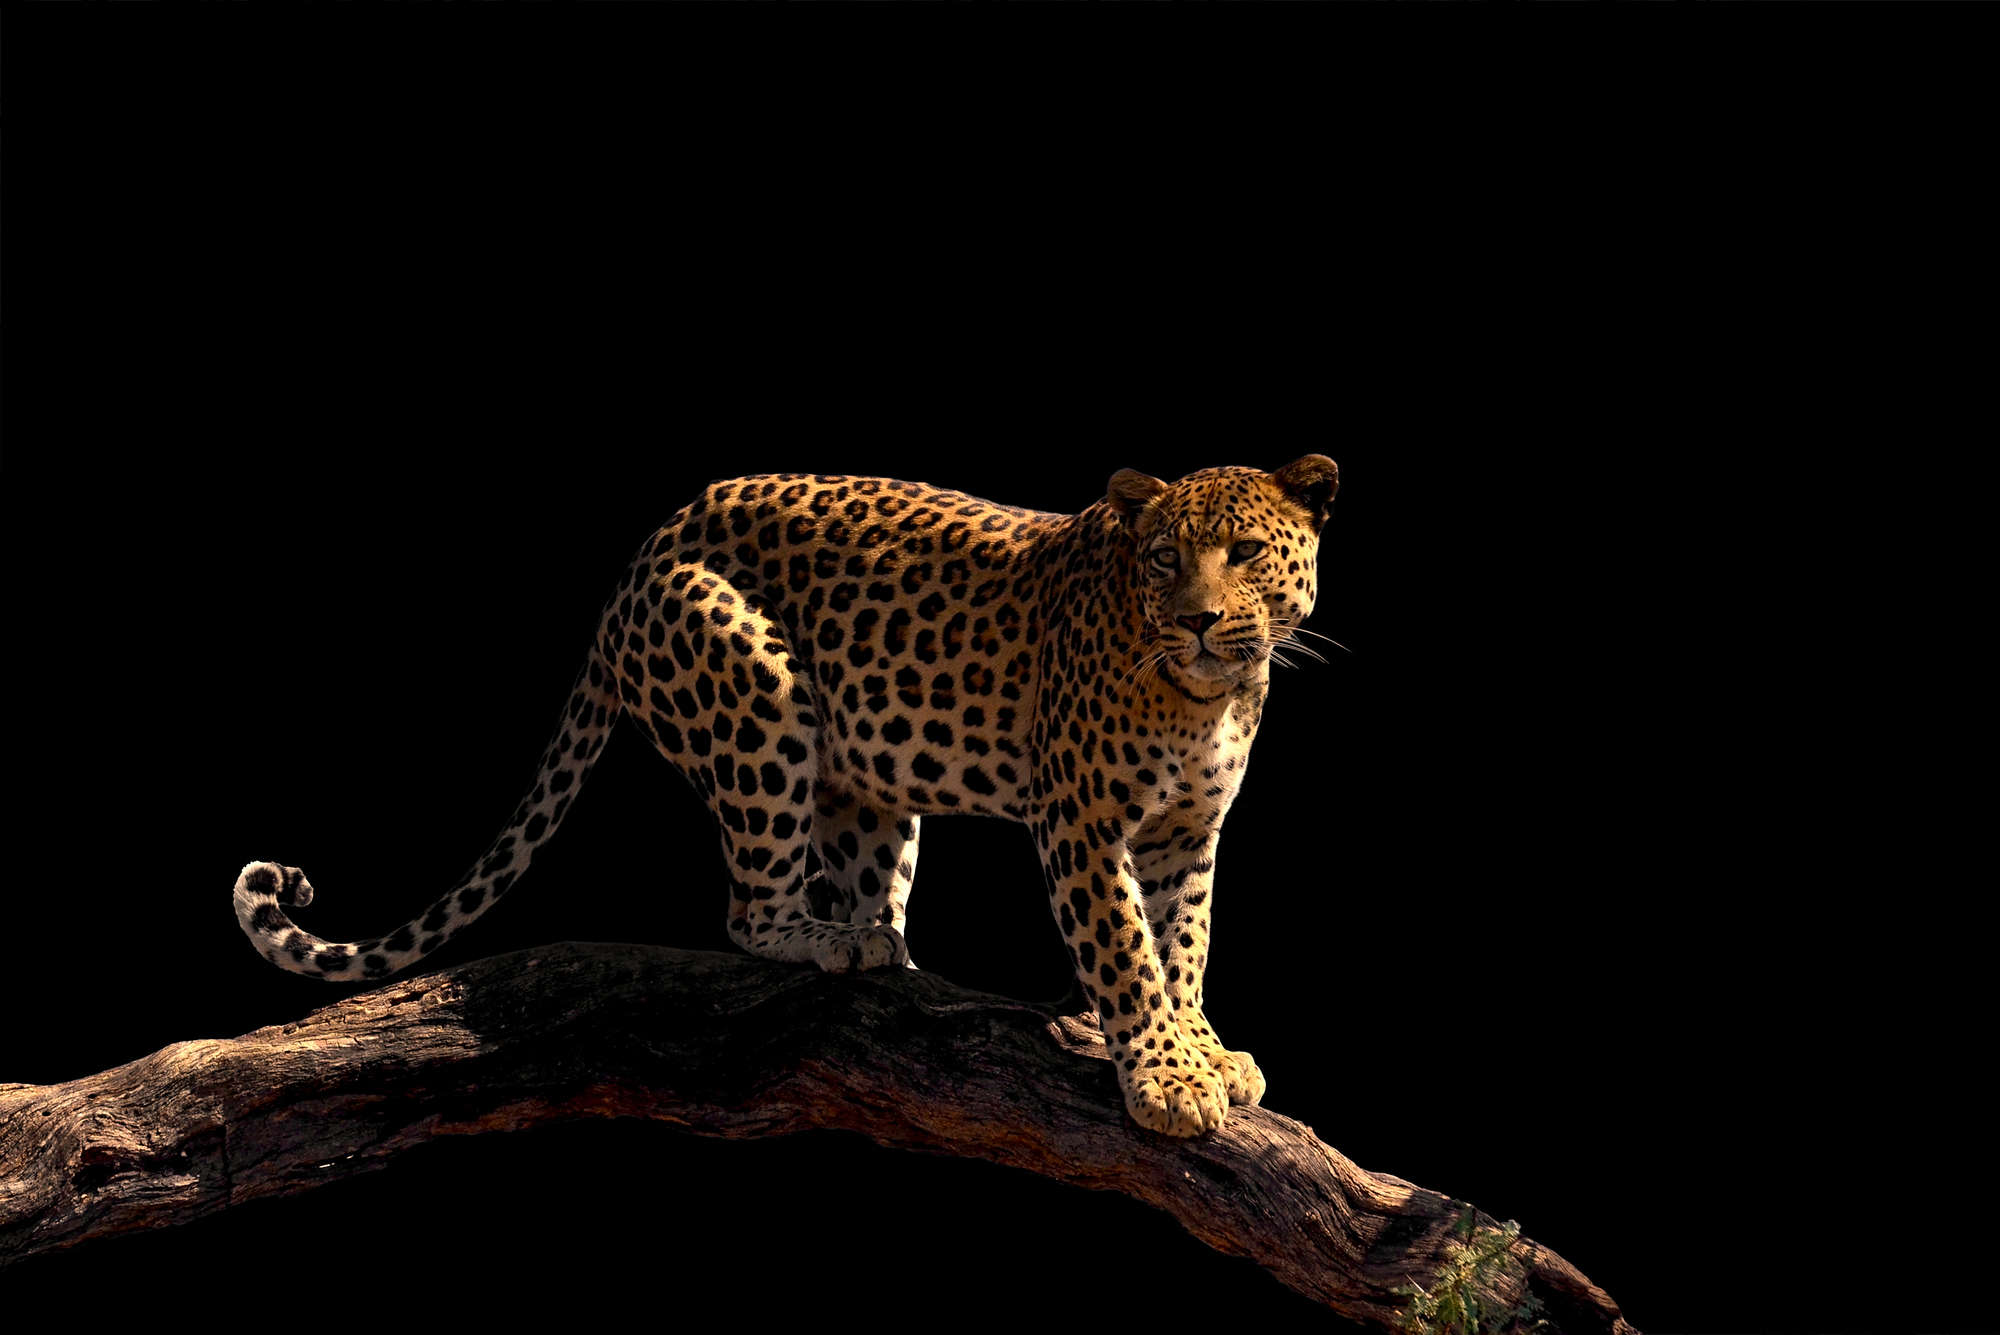             Leopard photo mural standing on a branch on structural non-woven
        